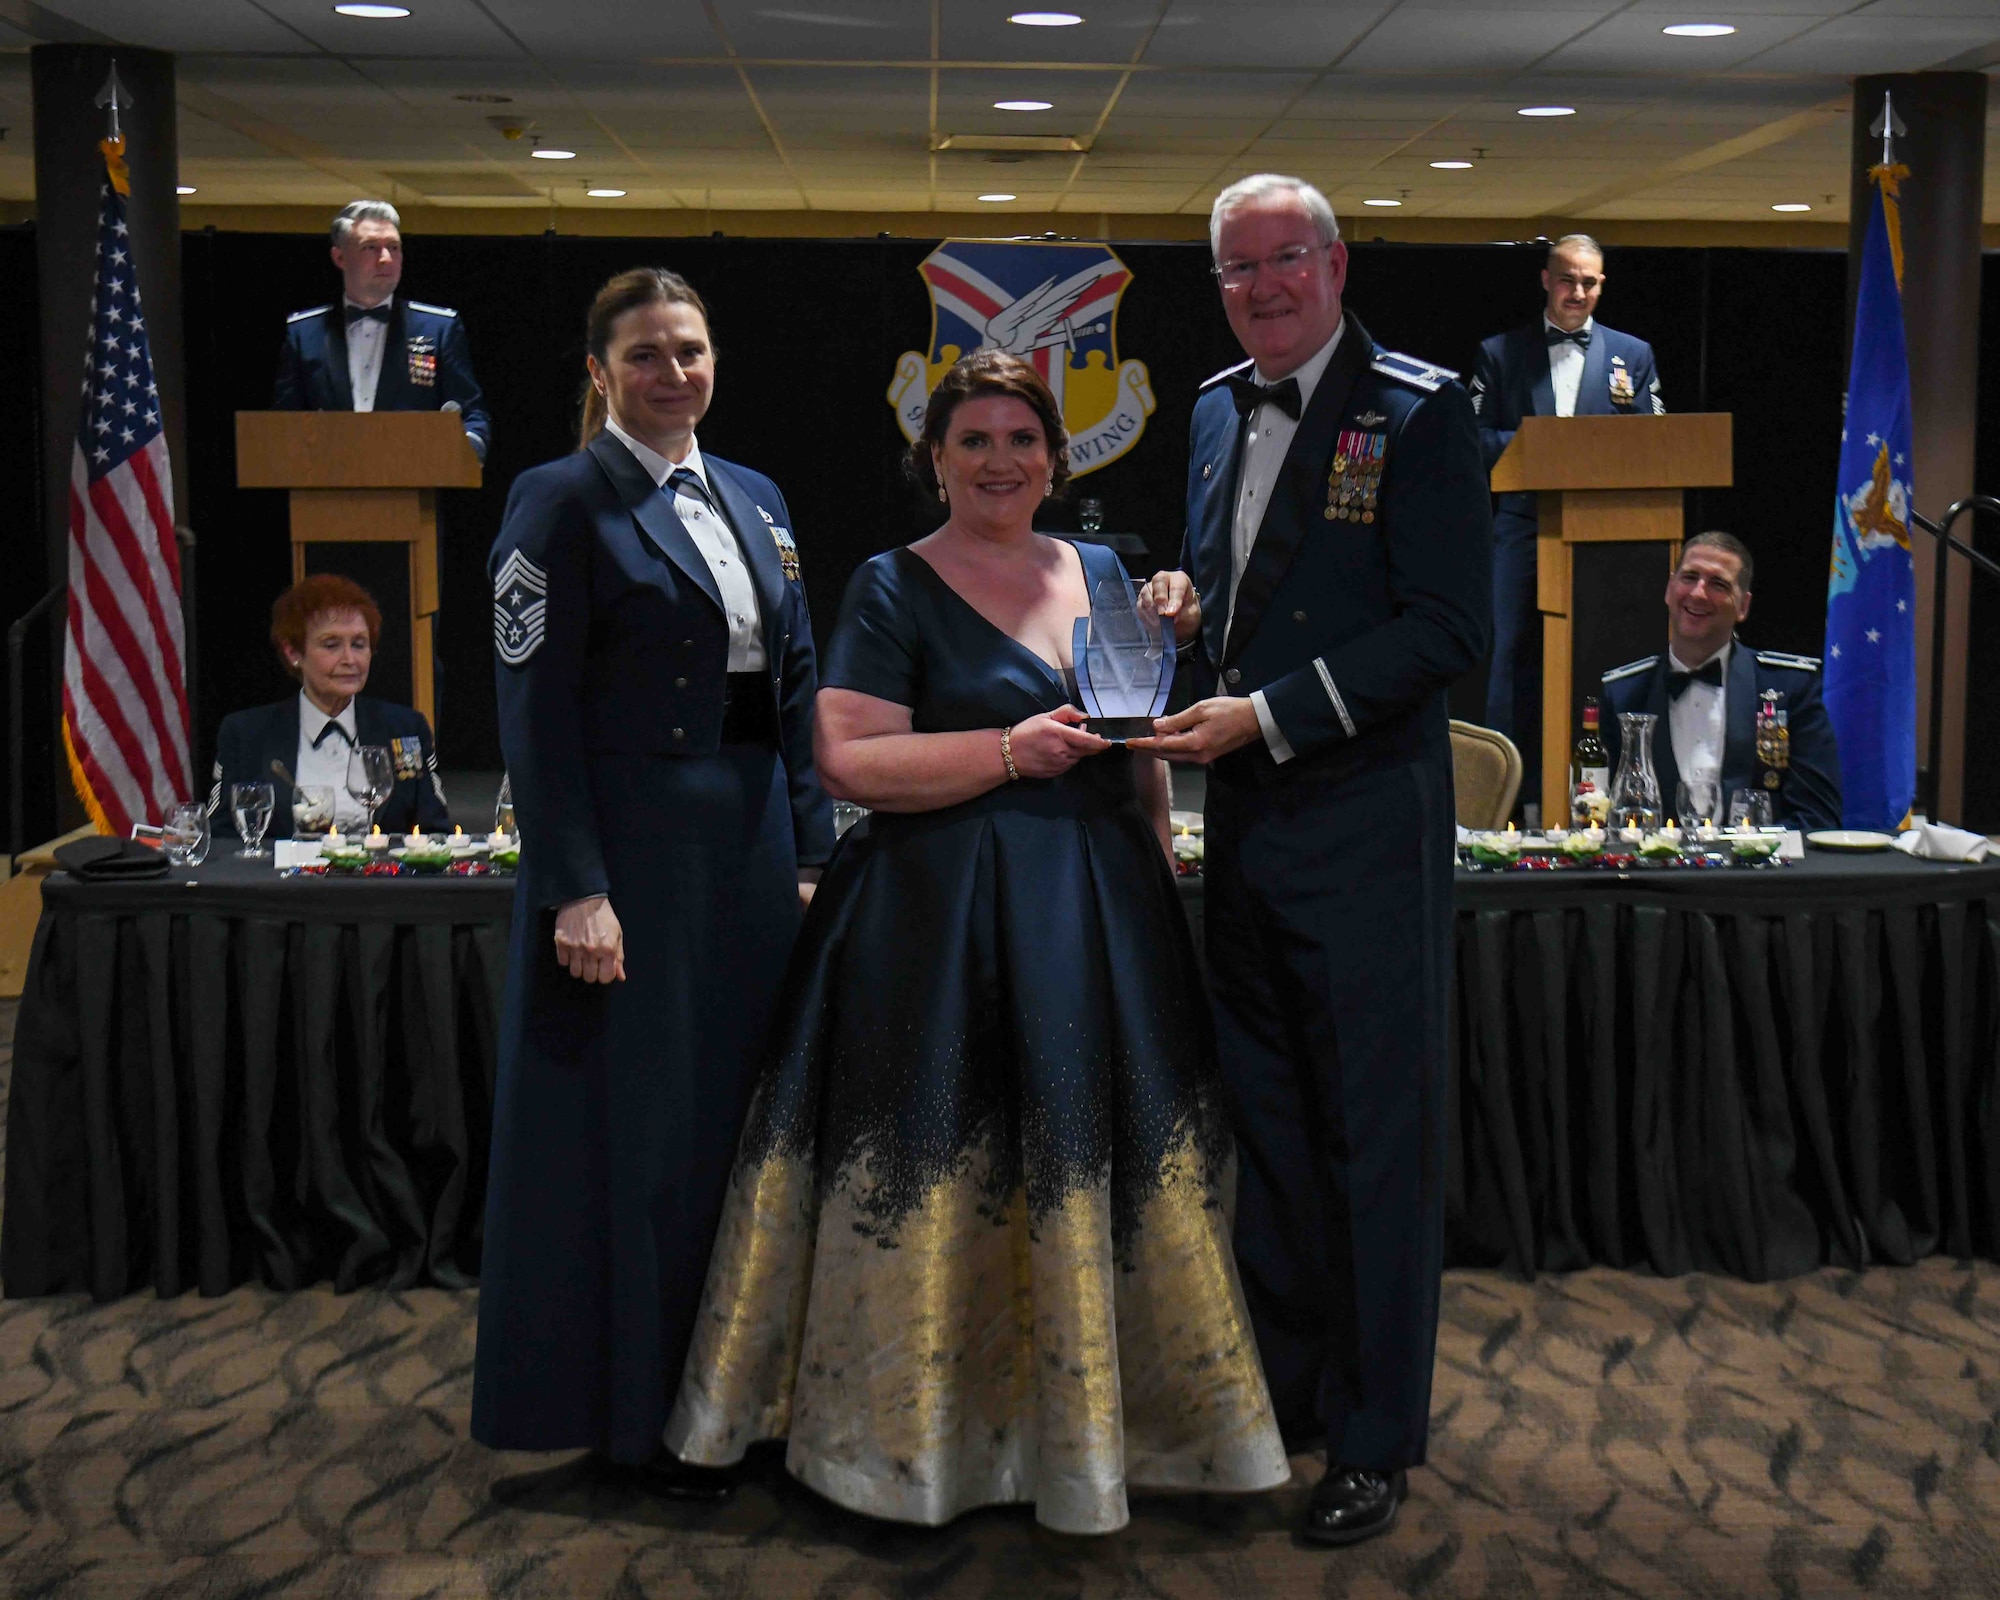 Shelly Trimble, the sexual assault response coordinator with the 910th Airlift Wing, receives the 2022 Senior Civilian of the Year award from 910th Airlift Wing Commander Col. Jeff Van Dootingh (right) and 910th AW Command Chief Master Sgt. Jennifer McKendree (left), during the unit’s annual awards banquet, March 4, 2023, at Youngstown Air Reserve Station, Ohio.